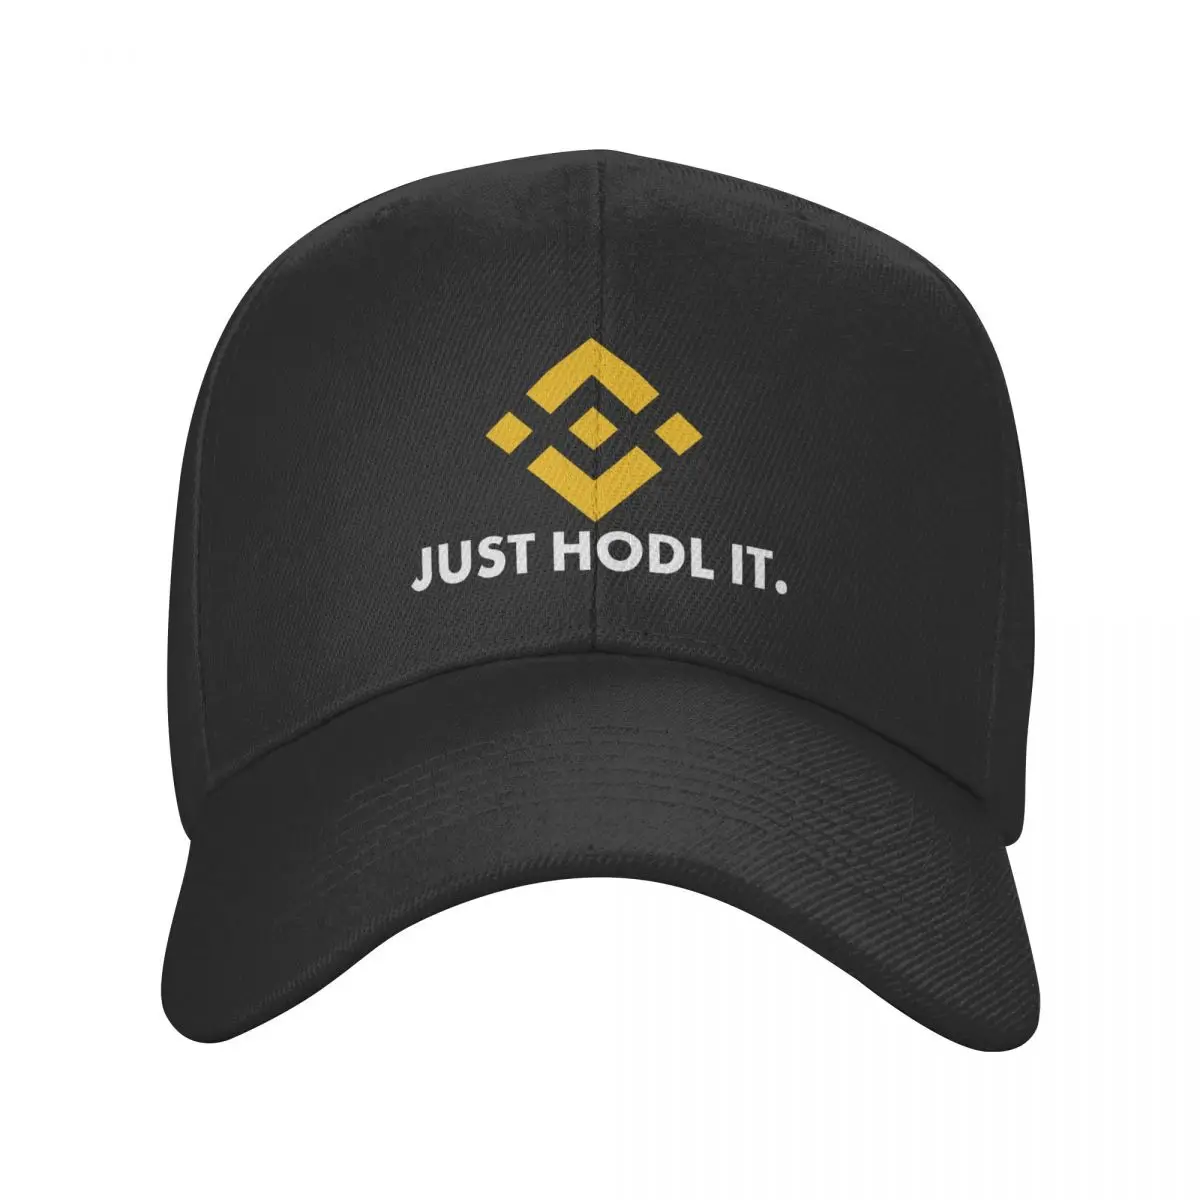 

Fashion Cryptocurrency Just Hodl It Baseball Cap for Men Women Adjustable Adult Dad Hat Outdoor Snapback Caps Trucker Hats